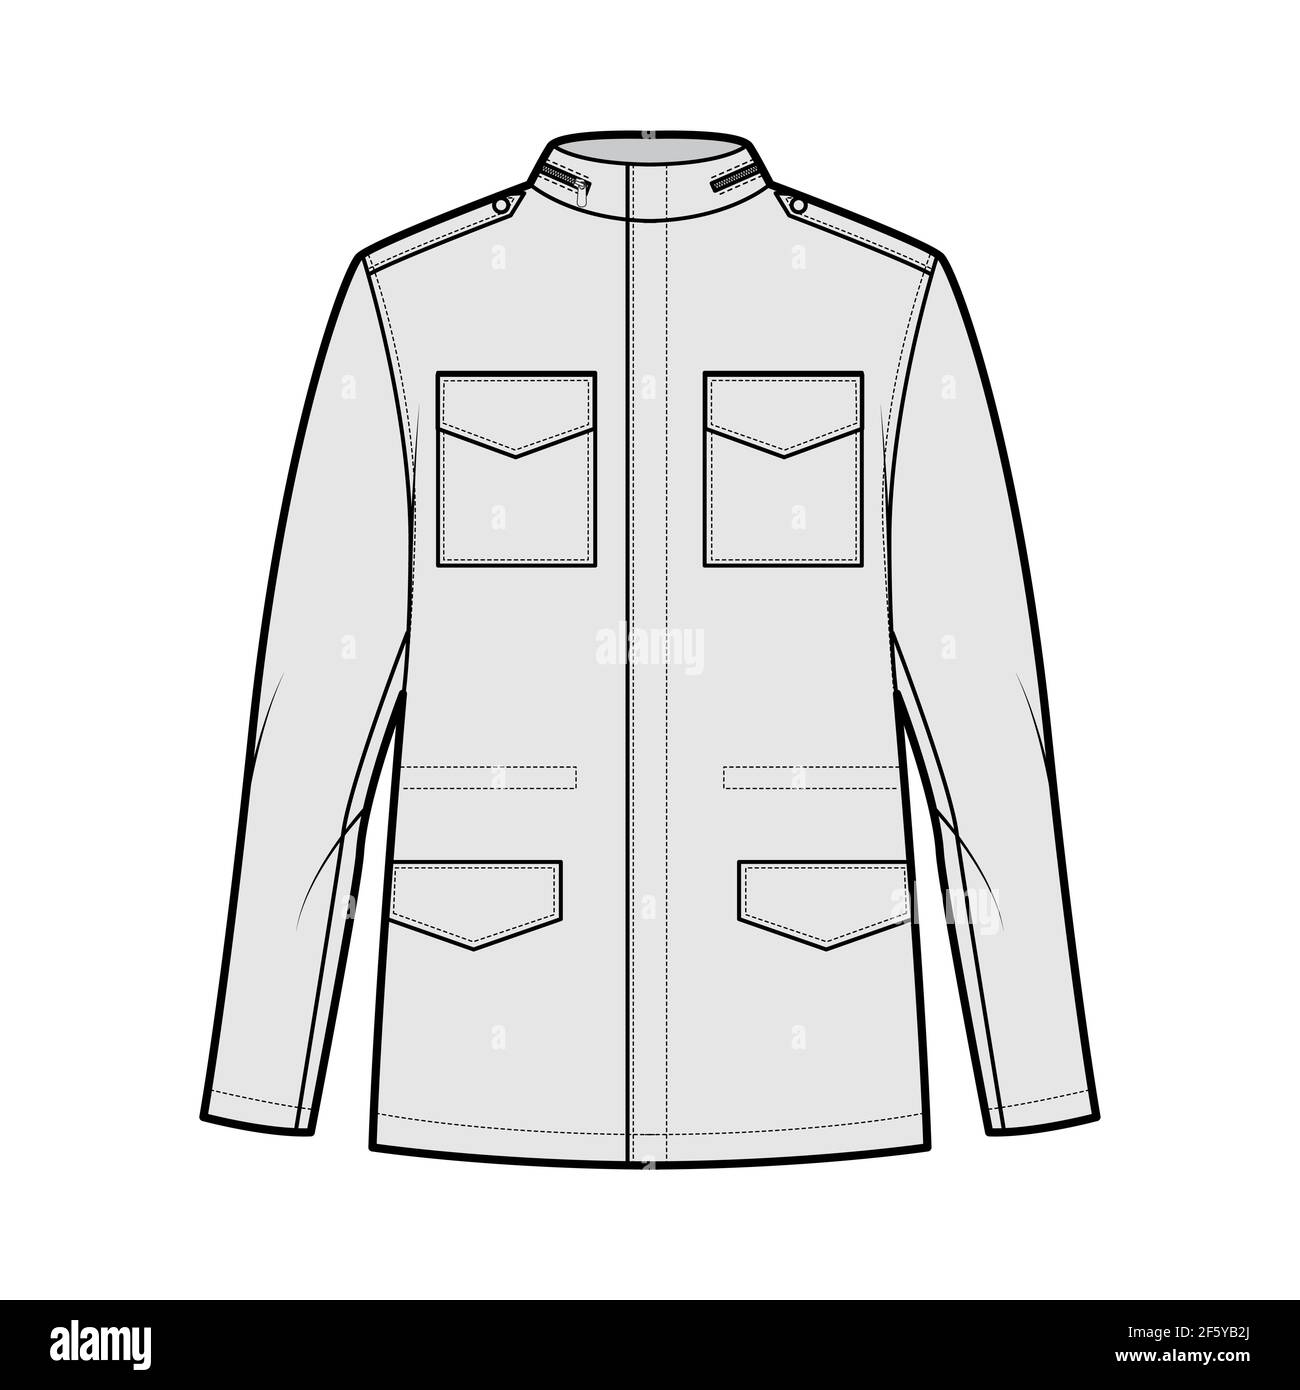 M-65 field jacket technical fashion illustration with oversized, stand collar, hide hood, long sleeves, flap pockets, epaulettes. Flat coat template front, grey color style. Women men top CAD mockup Stock Vector